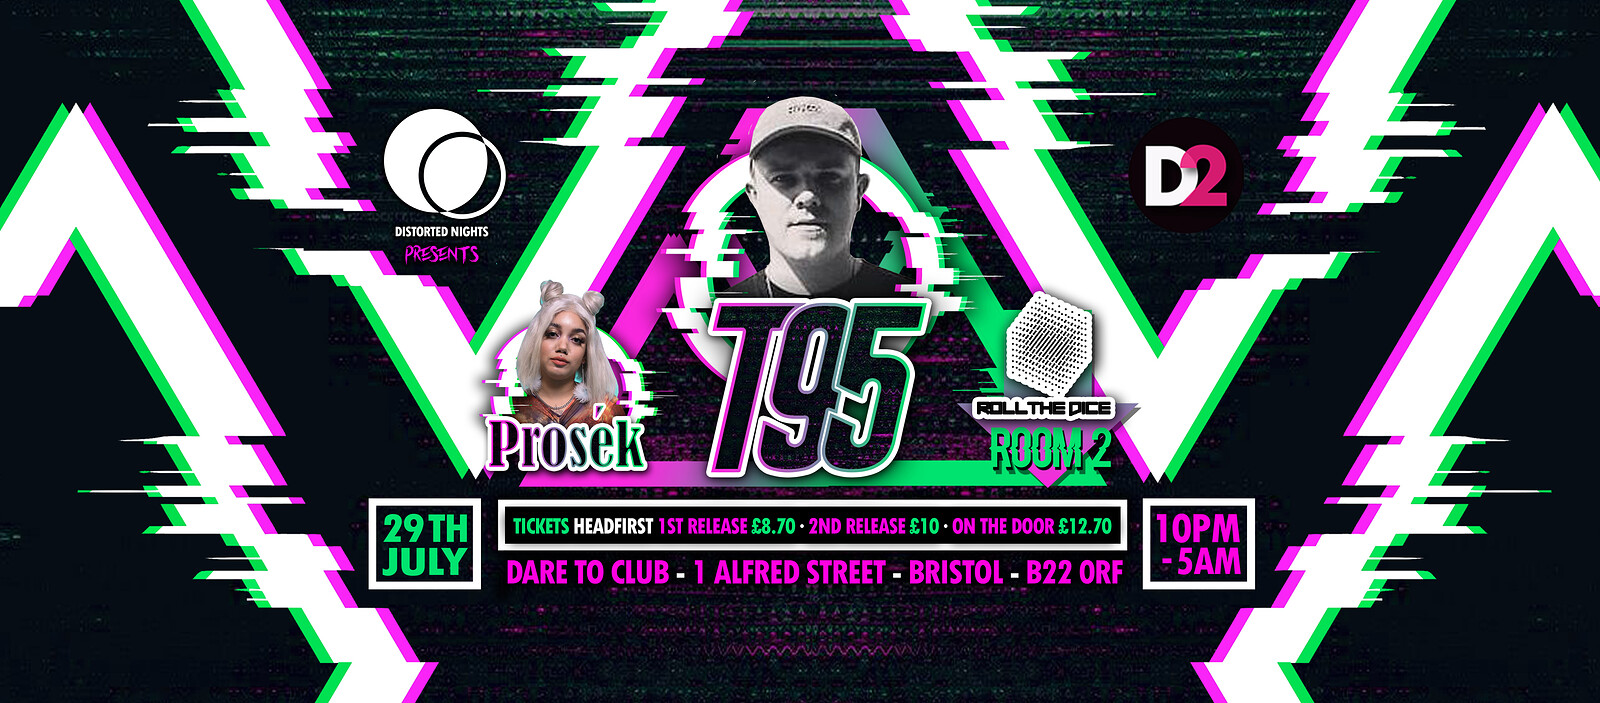 Distorted Nights - T95, Prosèk & More at Dare to Club